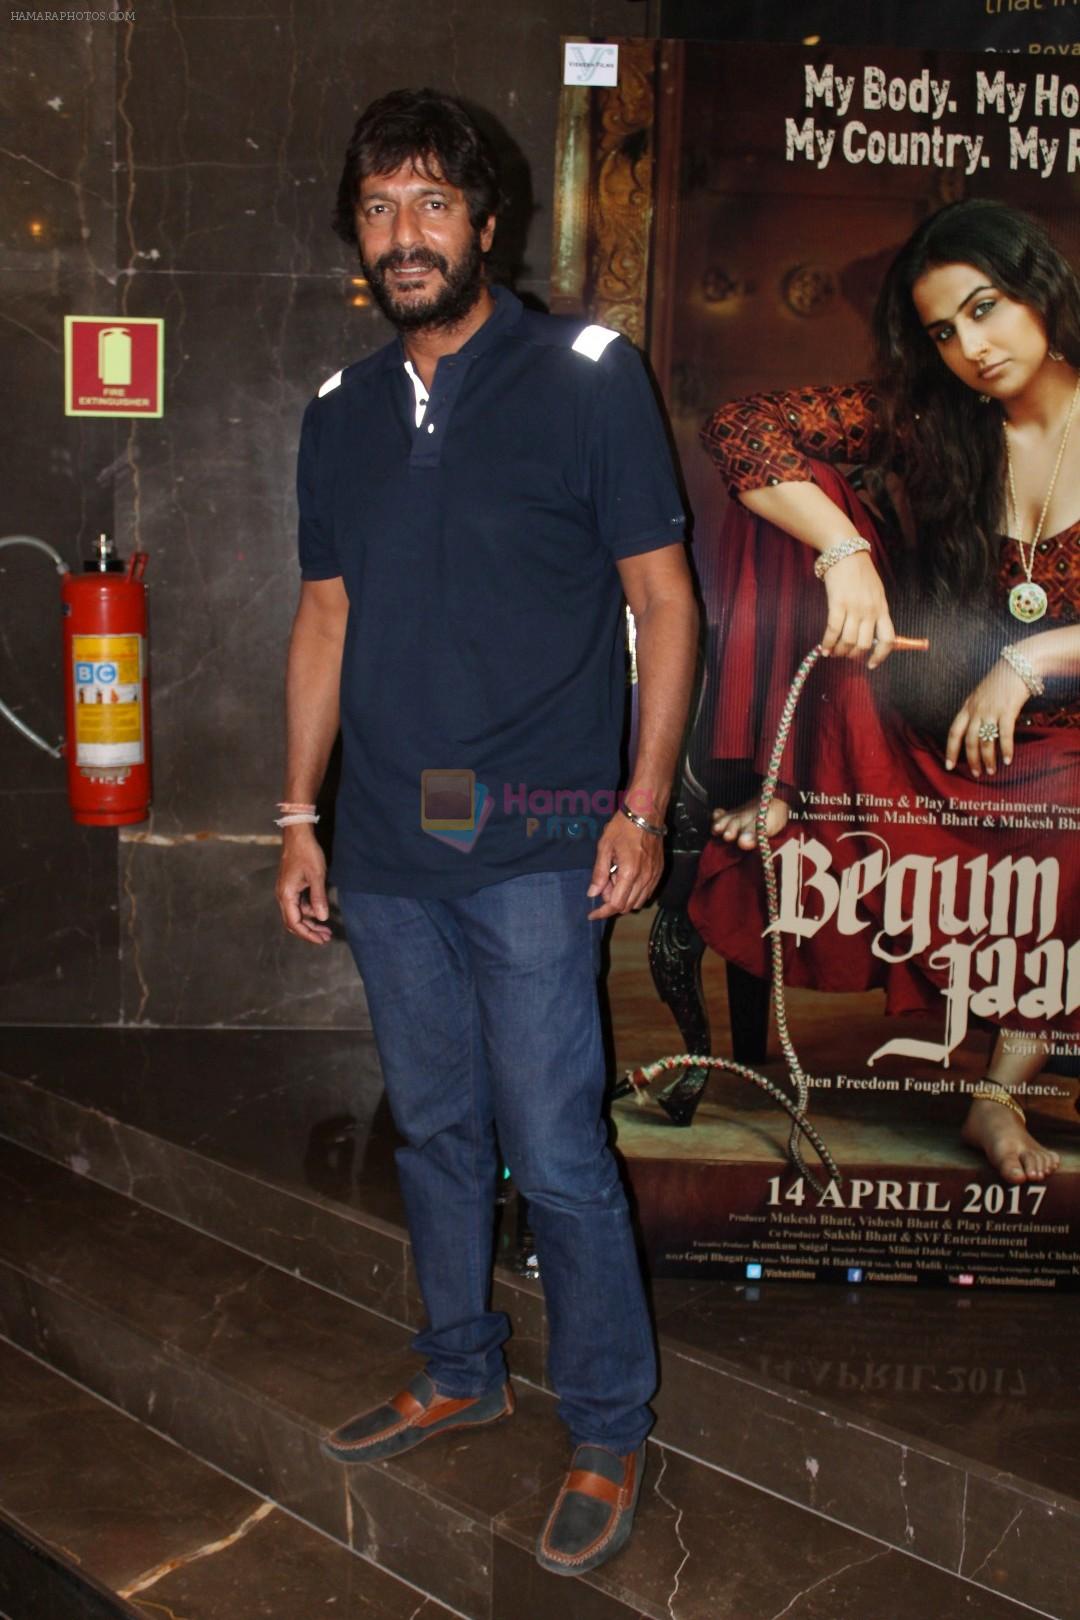 Chunky Pandey at Trailer Launch Of Begum Jaan on 14th March 2017